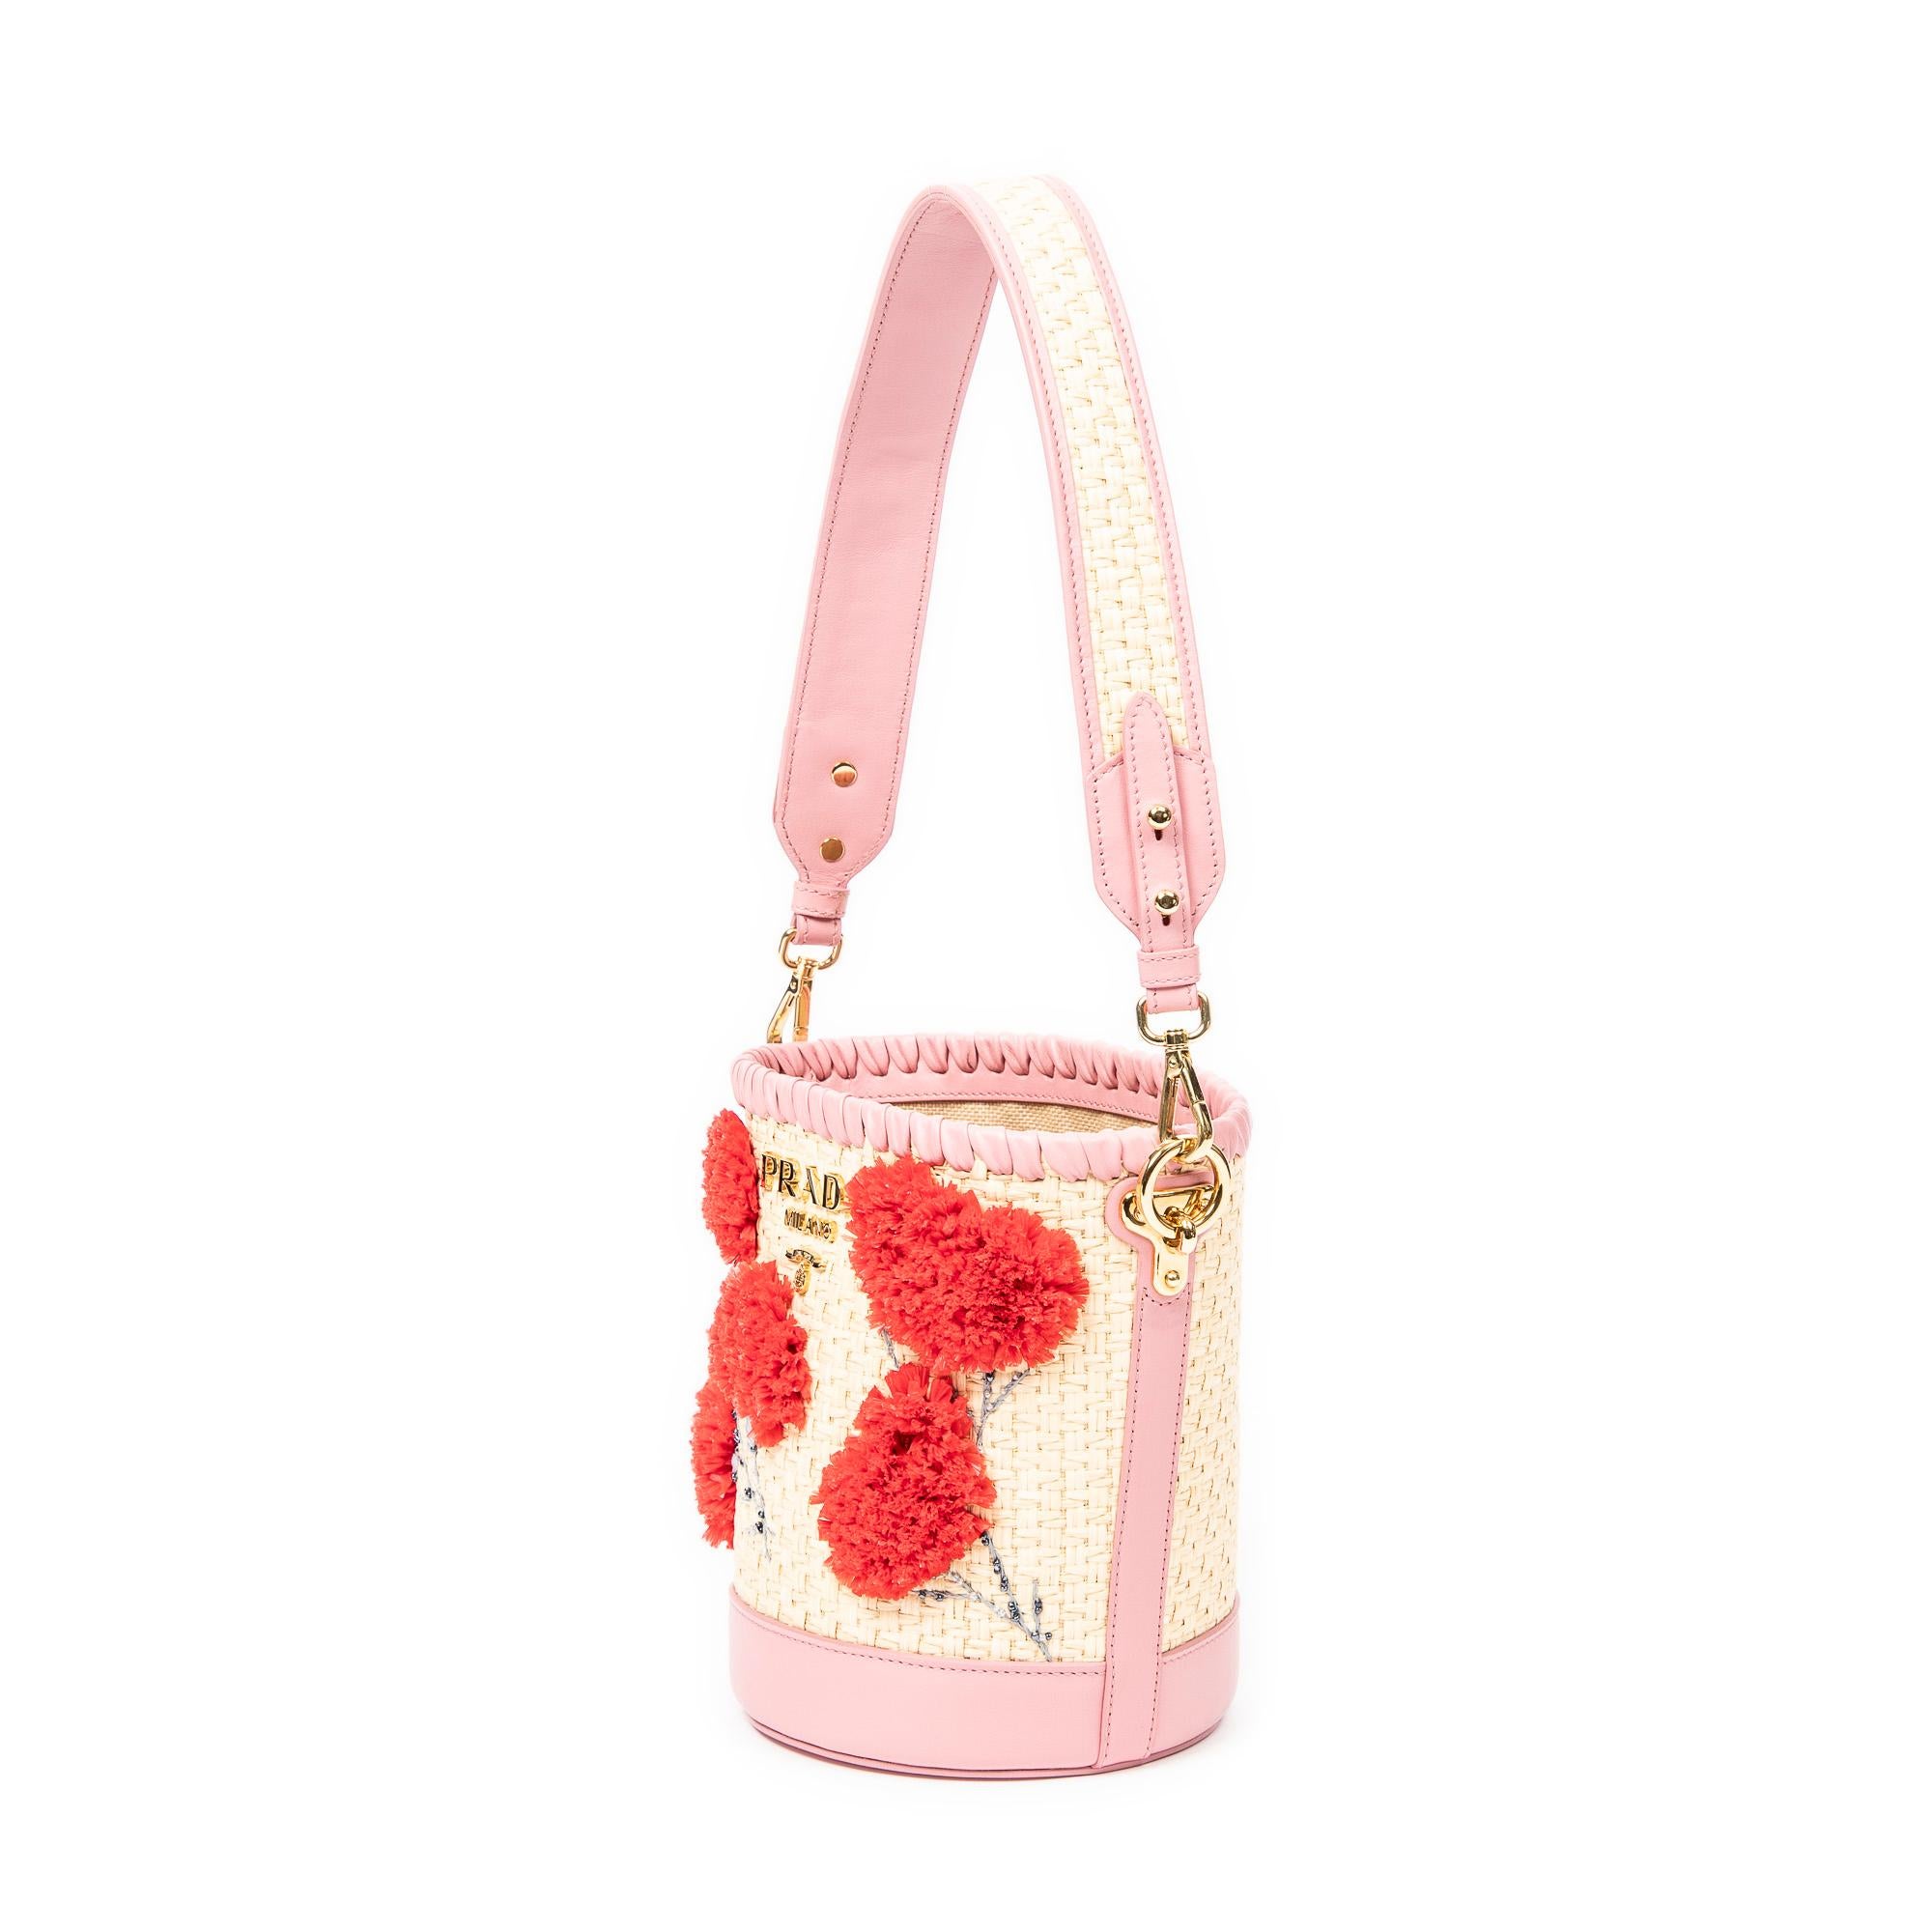 Prada’s Pink Embroidered Raffia Bucket Bag is casually elegant with its gold hardware and open top, leading to a spacious woven canvas interior with a single zippered pocket.

SPECIFICS
Length: 8